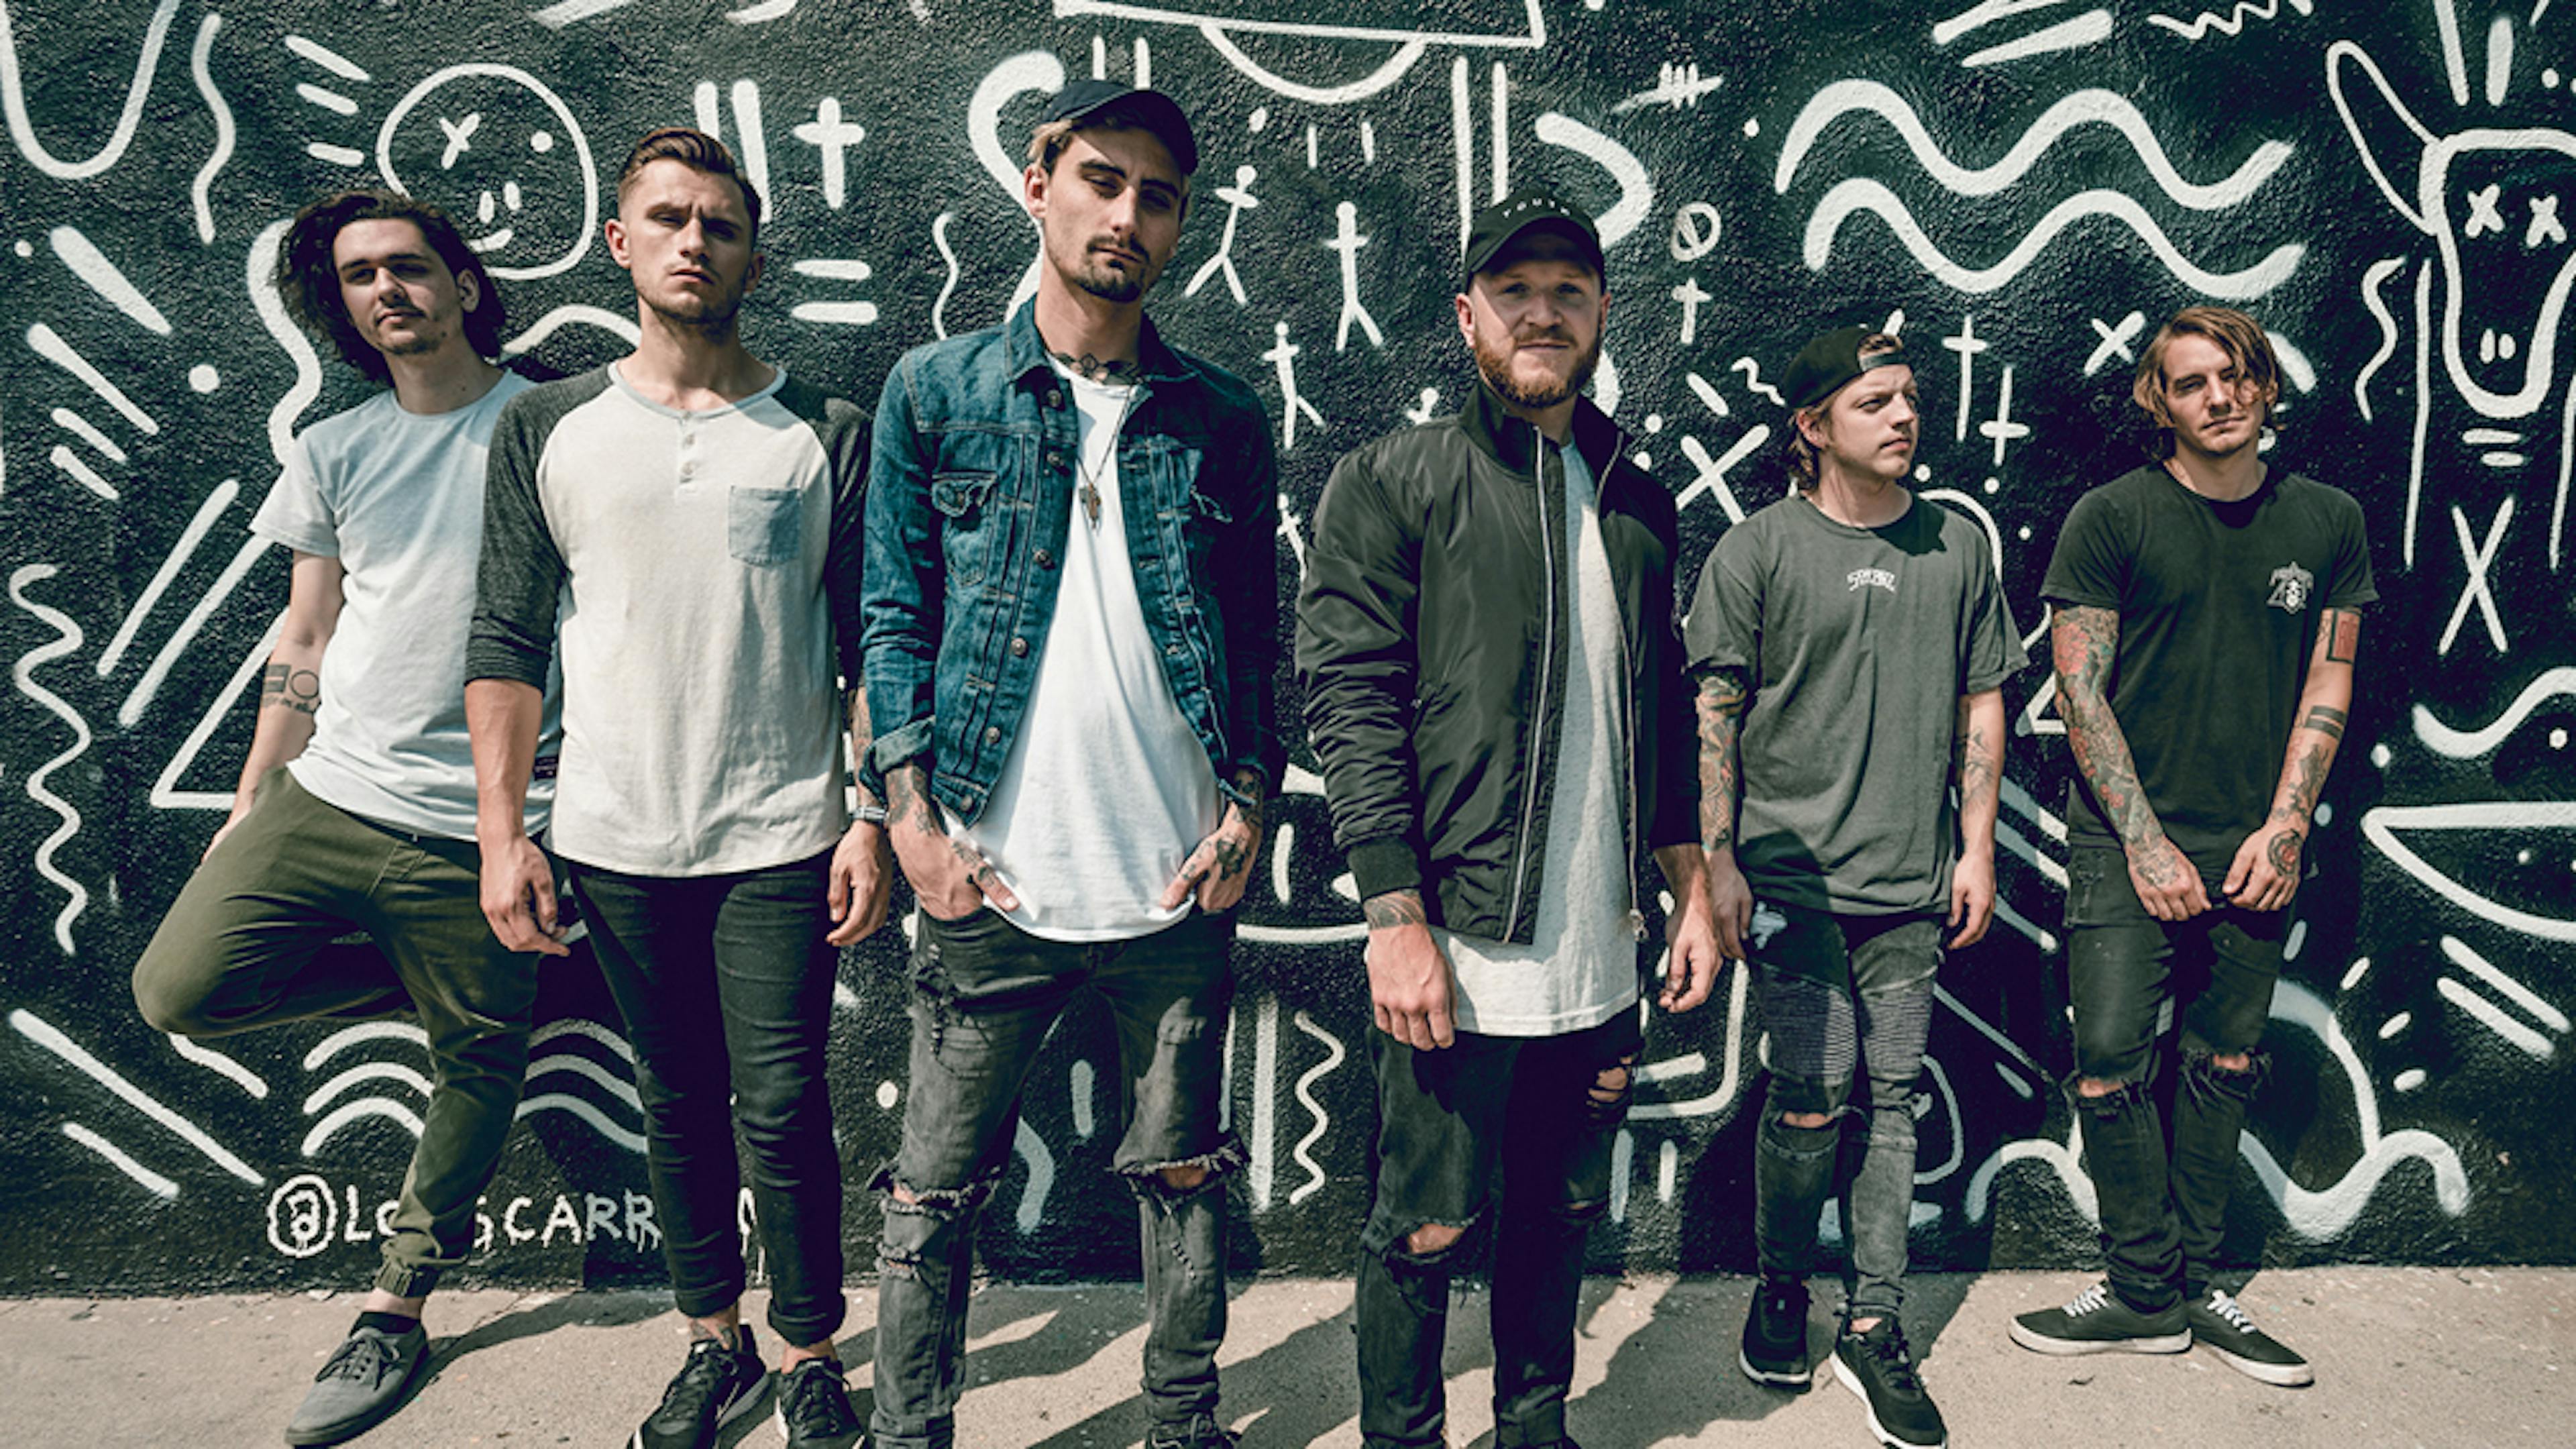 We Came As Romans Are Working On New Album, May Feature Kyle Pavone